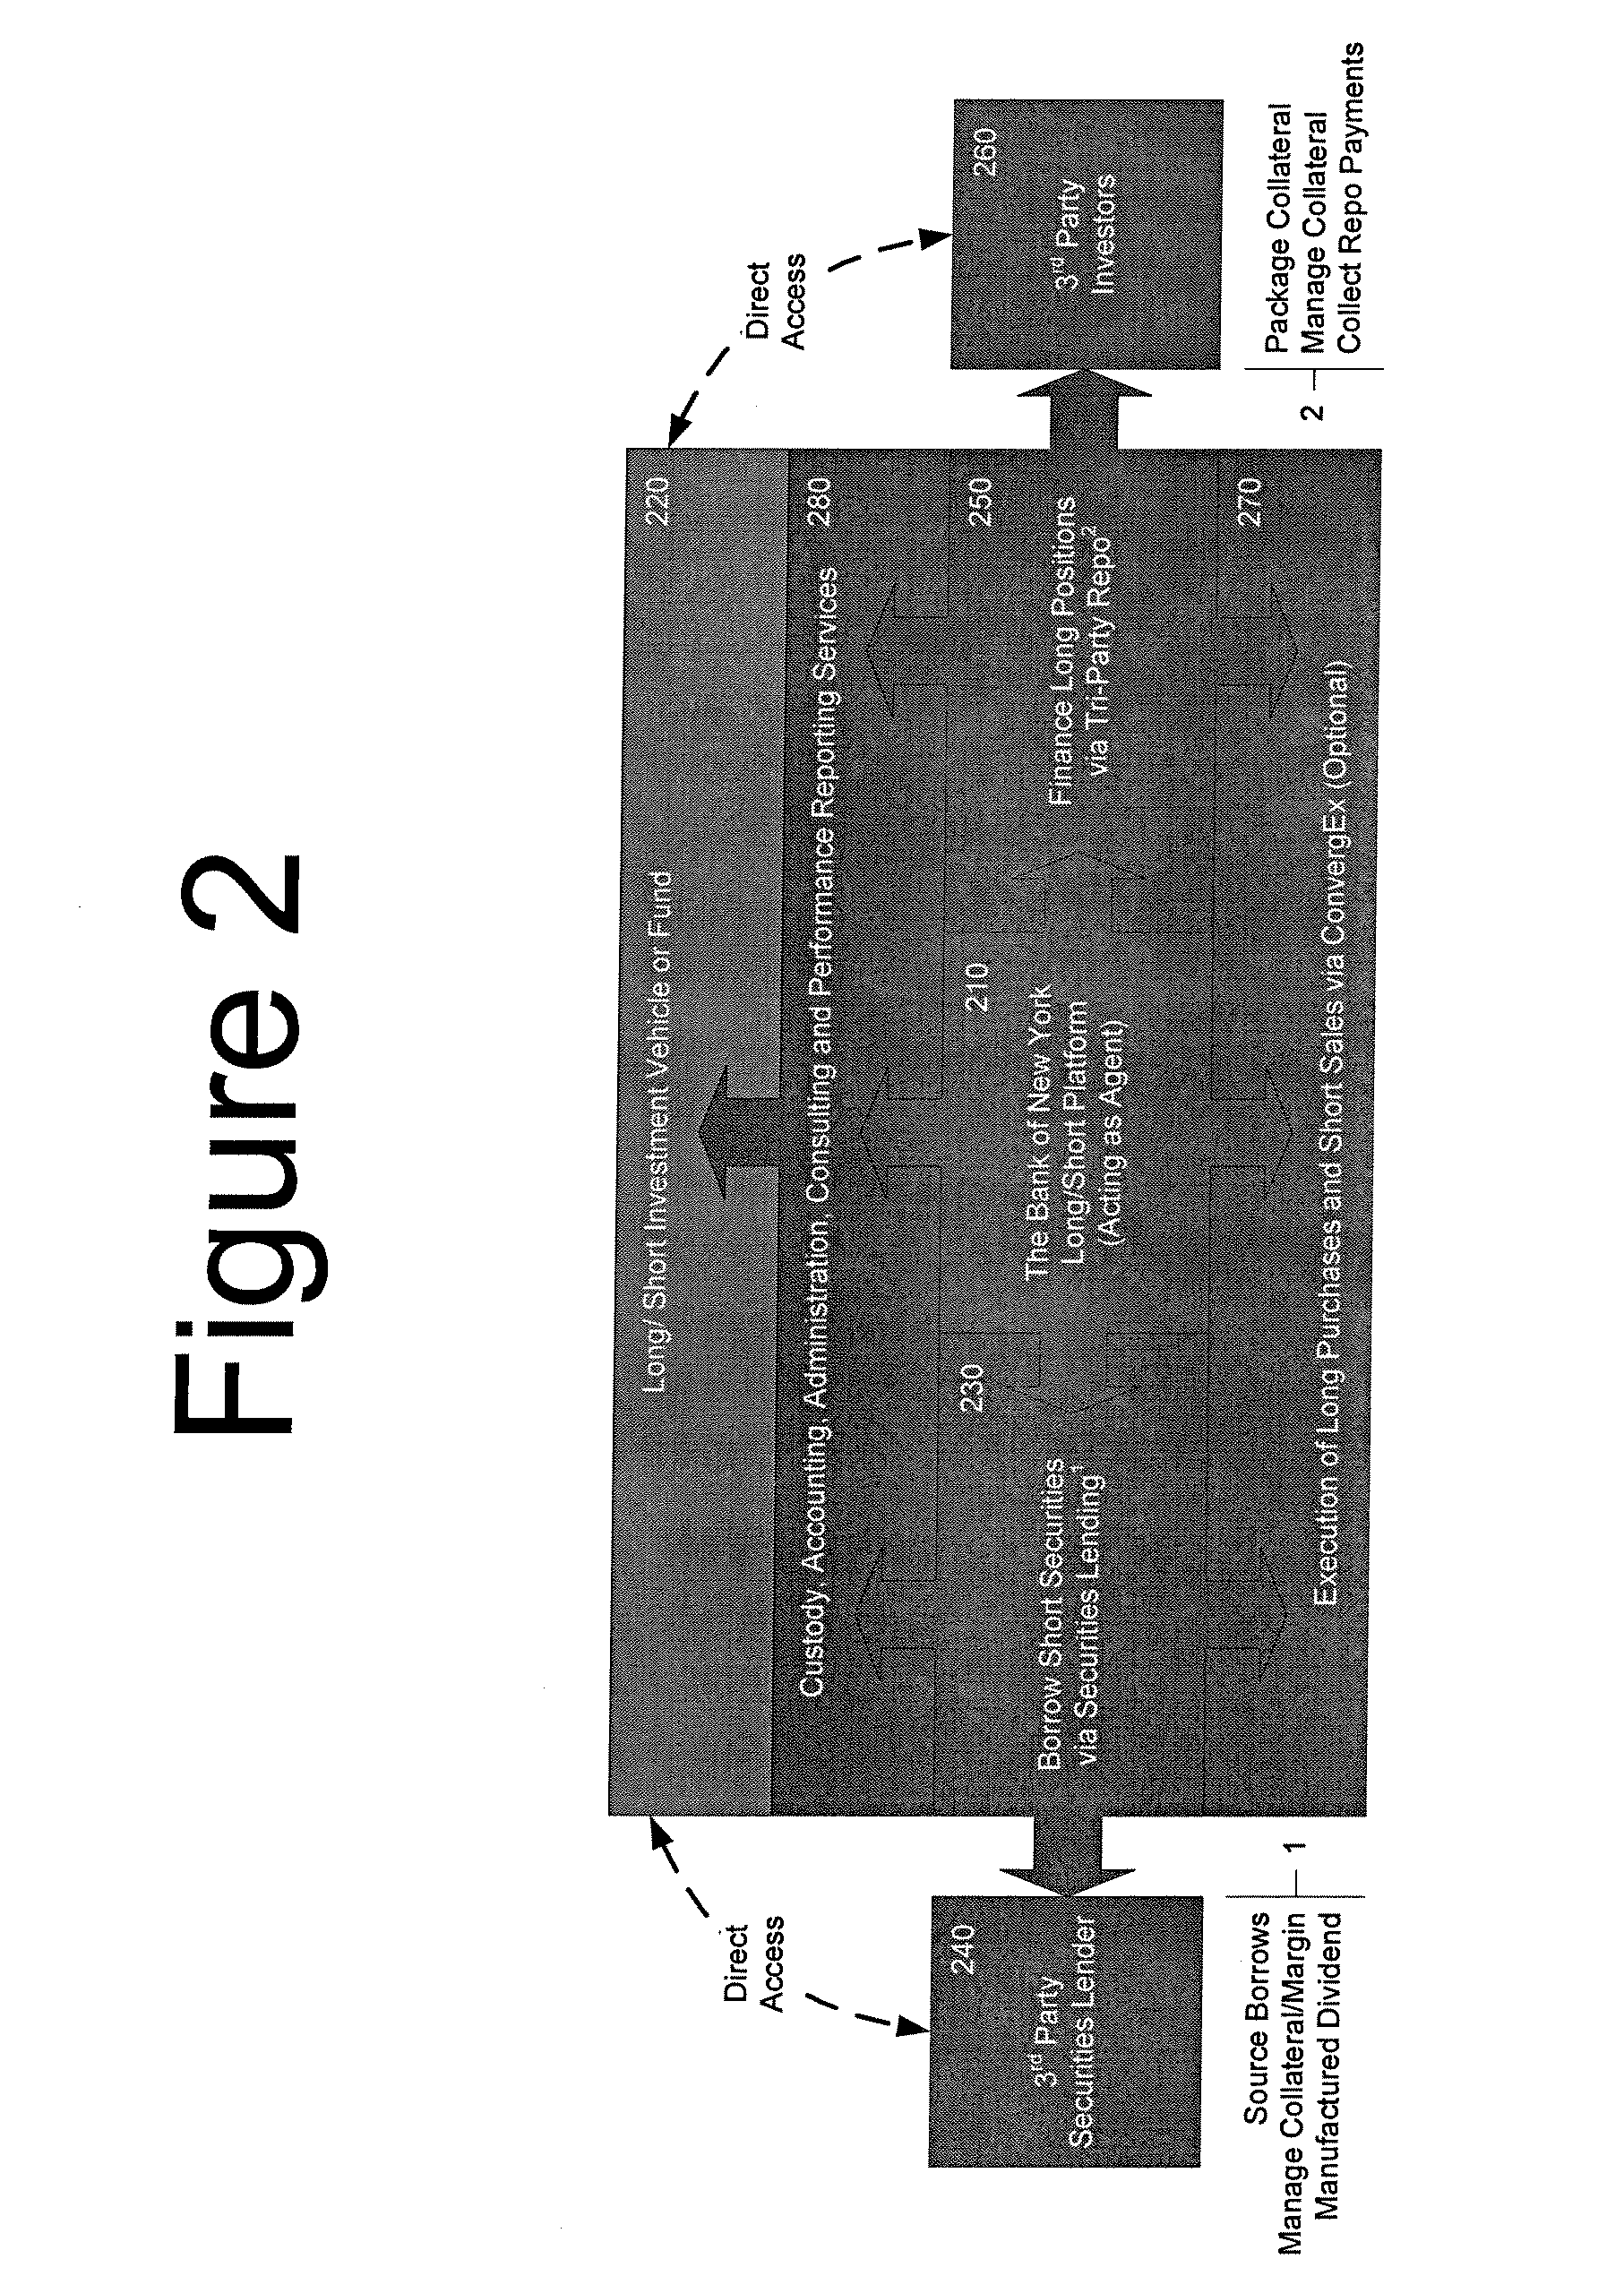 Systems and methods for providing financial services